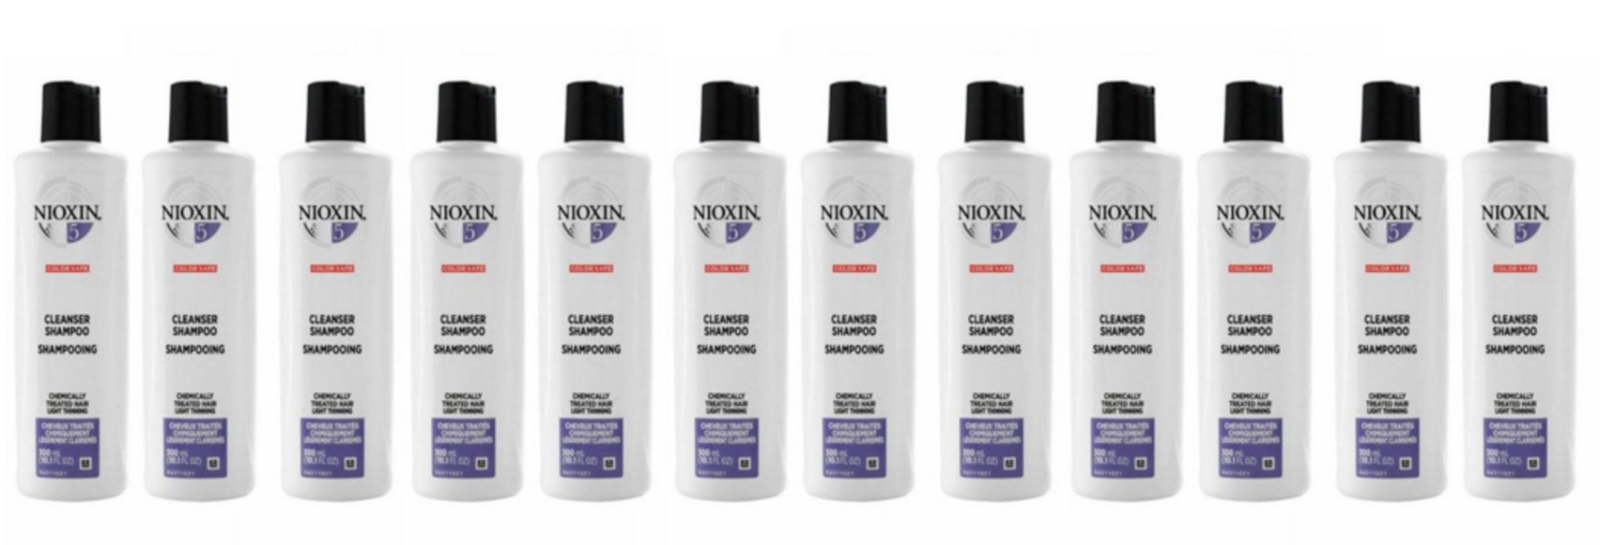 Primary image for NIOXIN System 5 Cleanser Shampoo 10.1oz (Pack of 12)